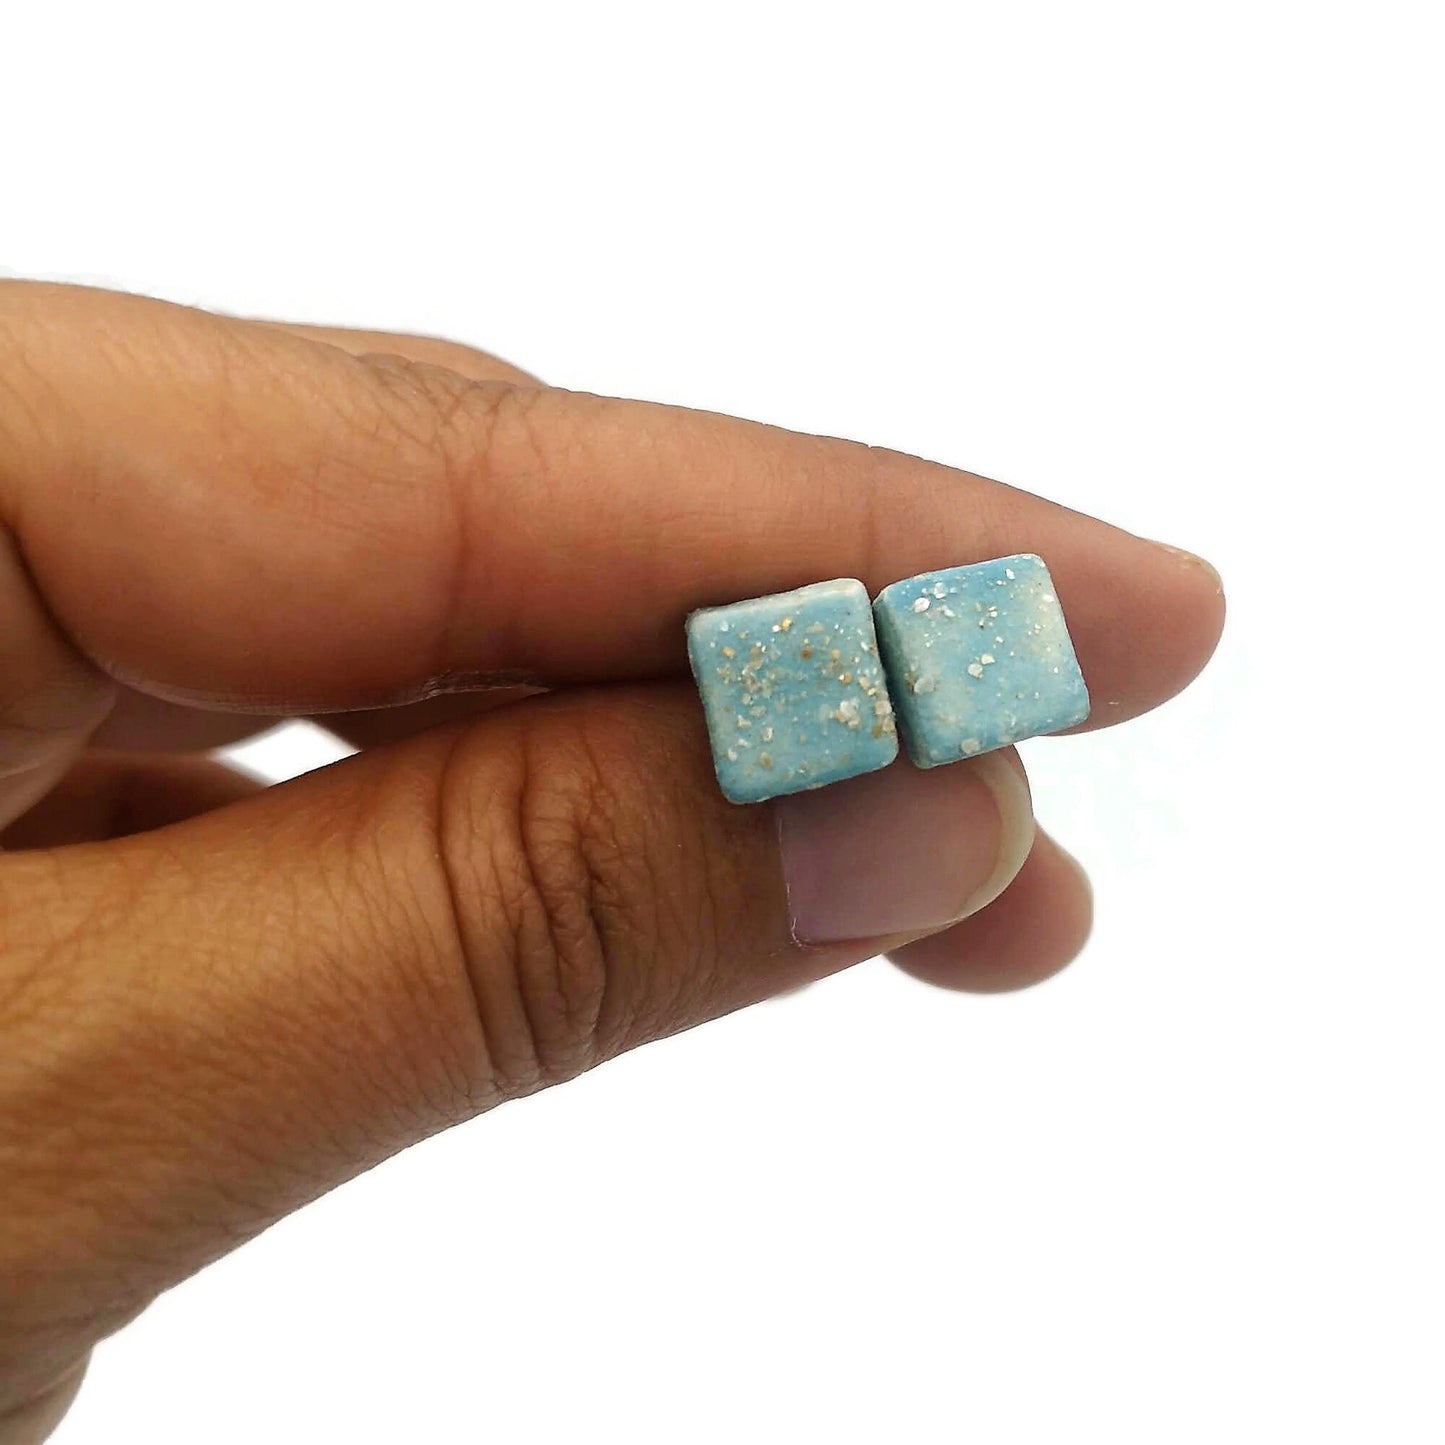 Sparkly Blue Square Ceramic Stud Earrings For Women, Handmade Jewelry Gifts For Her, Aesthetic Clay Stud Earrings, Novelty Dainty Earrings - Ceramica Ana Rafael